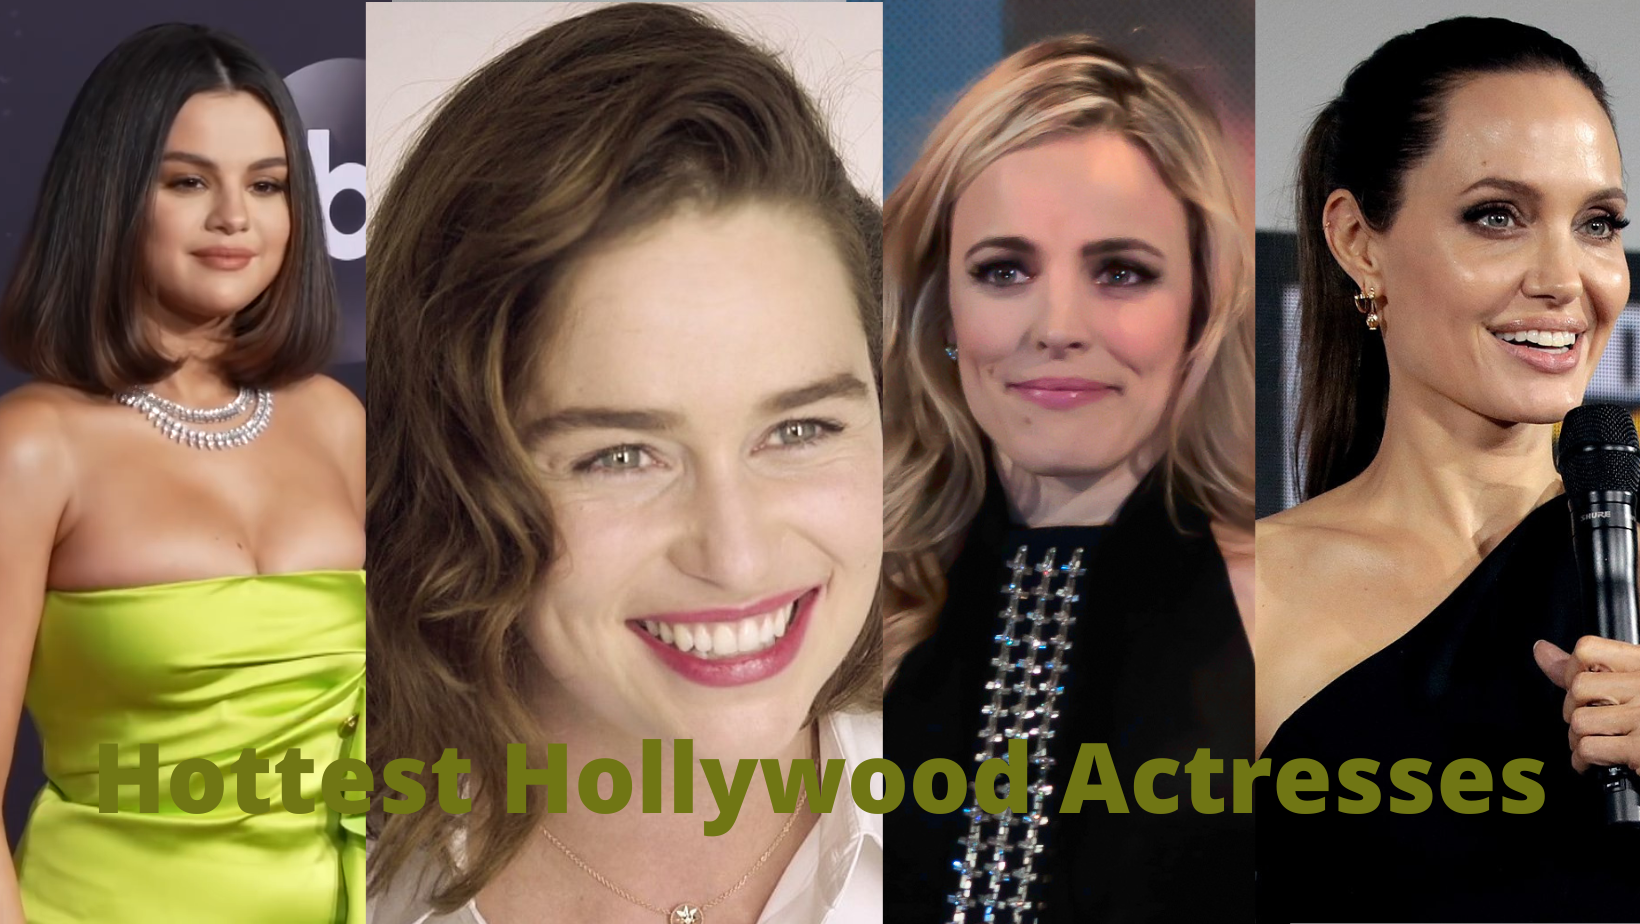 Hottest Hollywood Actresses